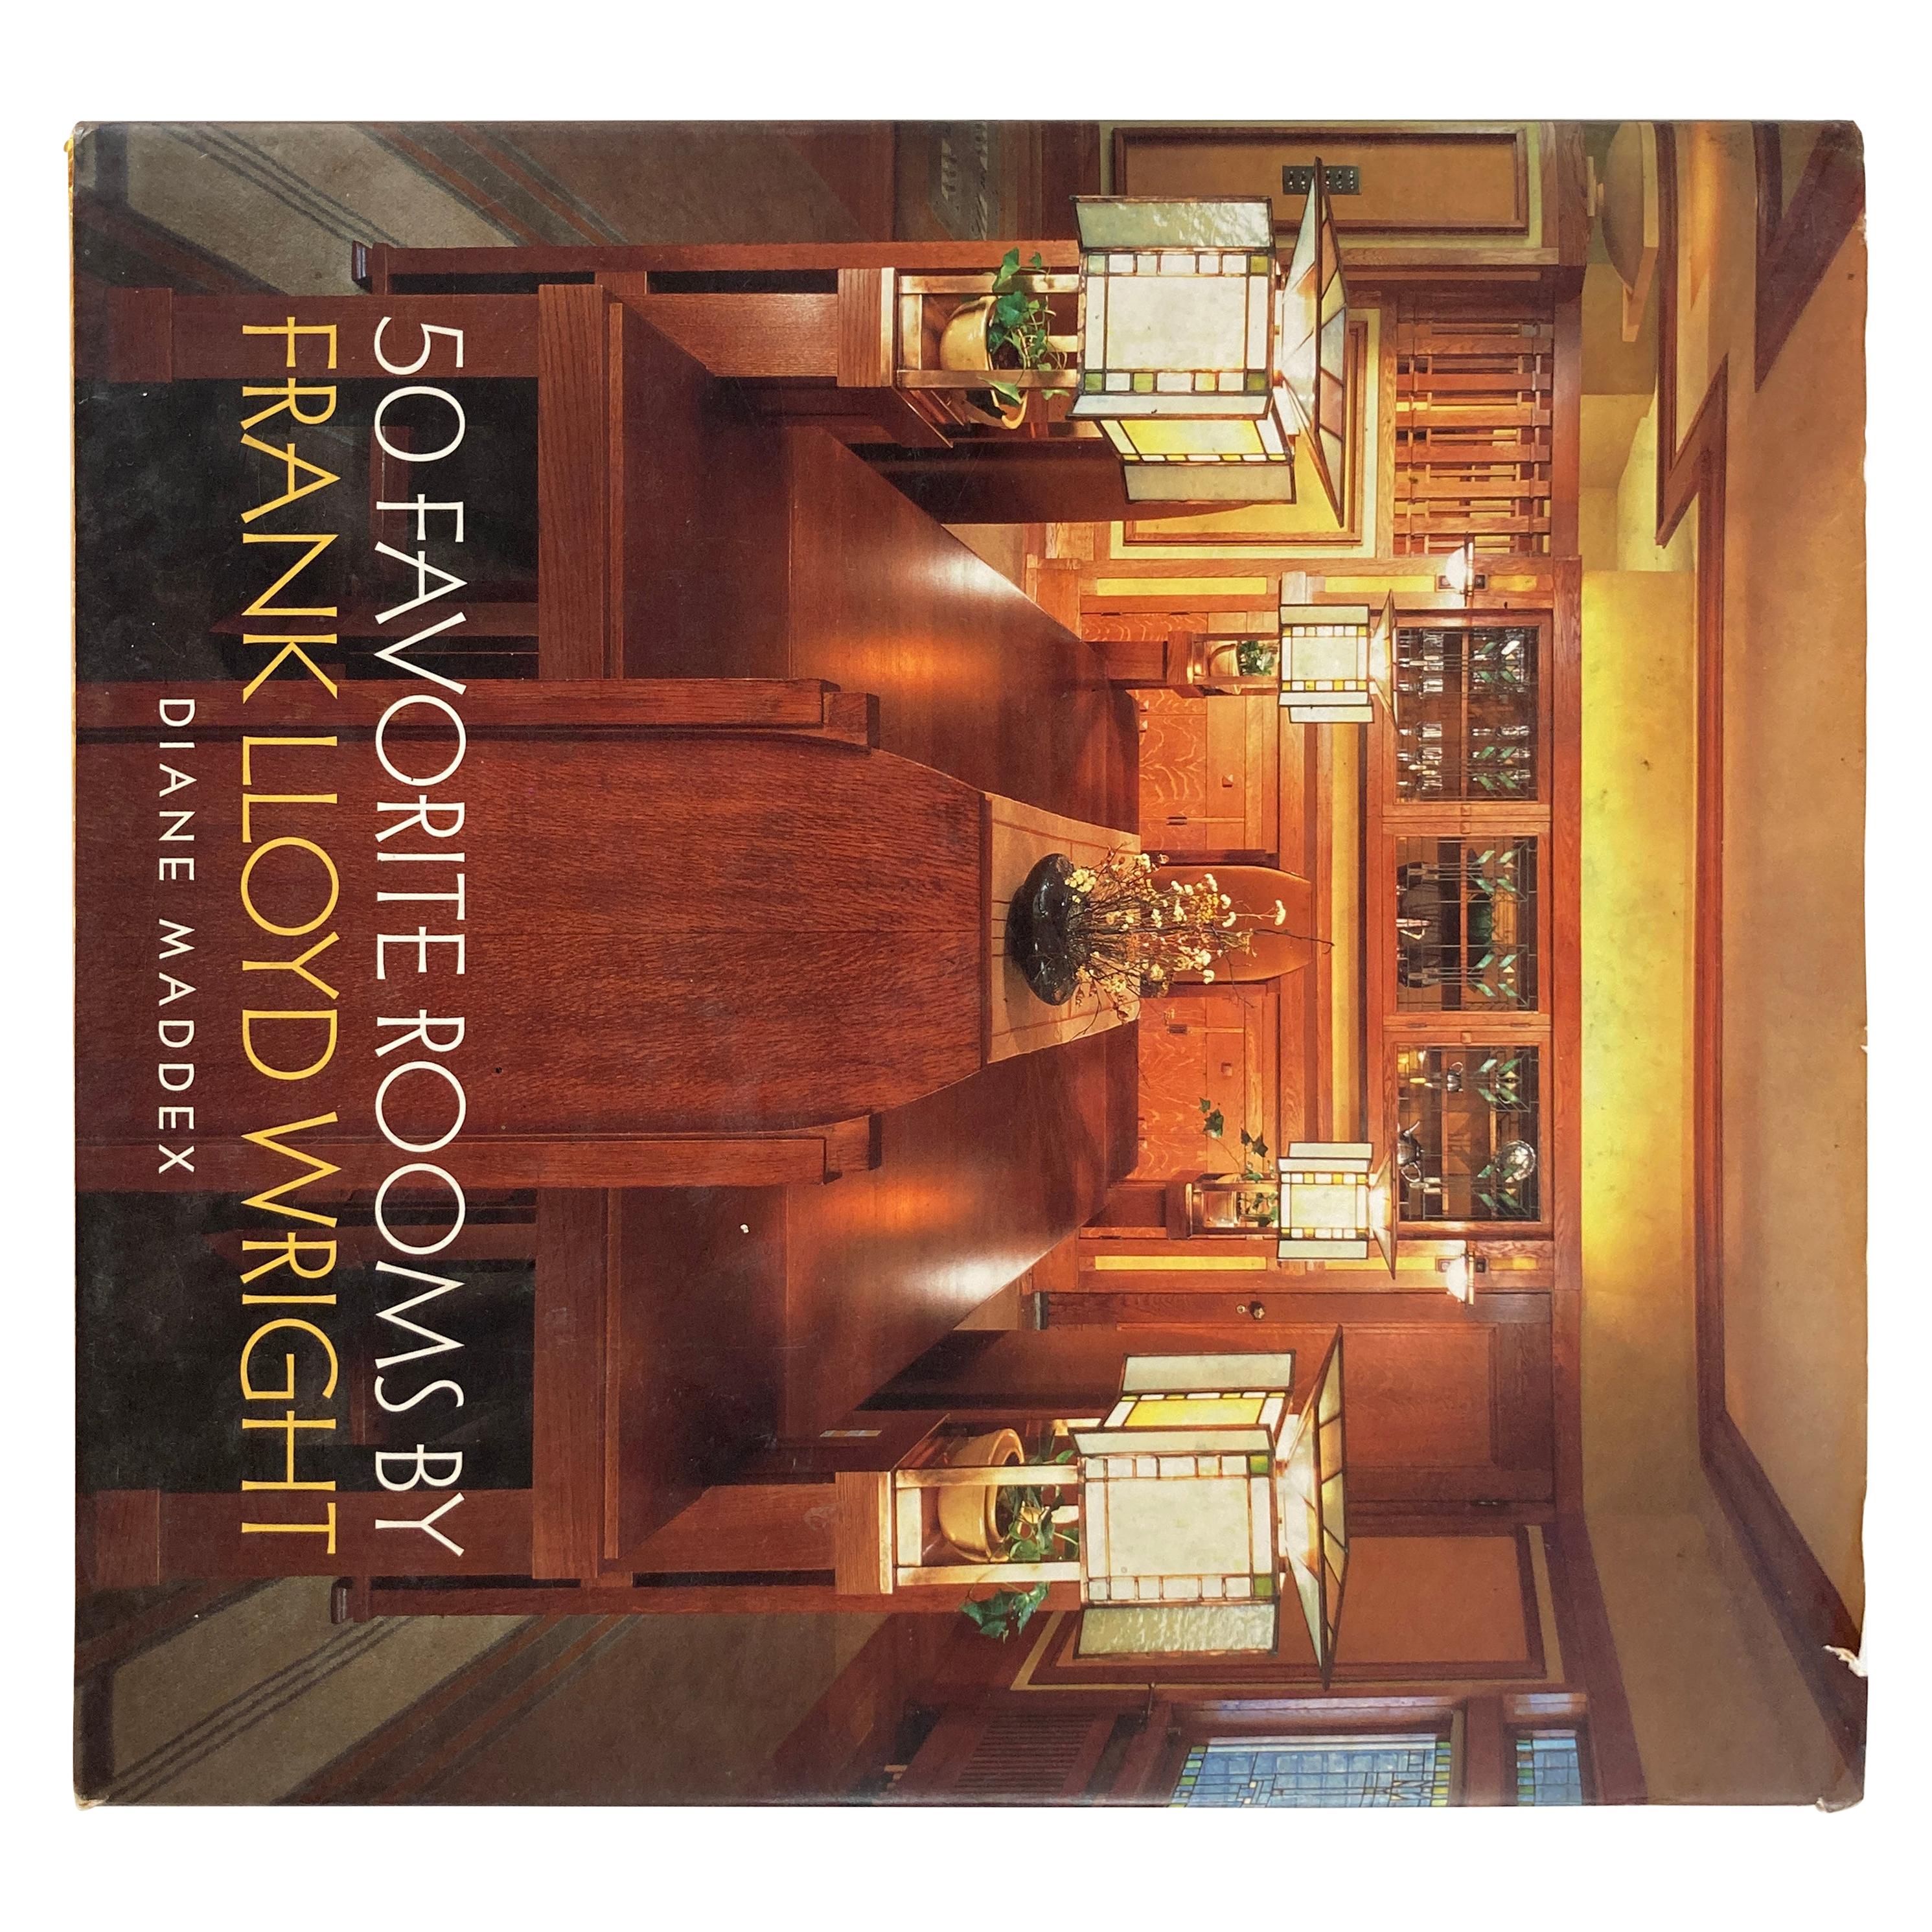 Fifty Favorite Rooms by Frank Lloyd Wright Hardcover Book